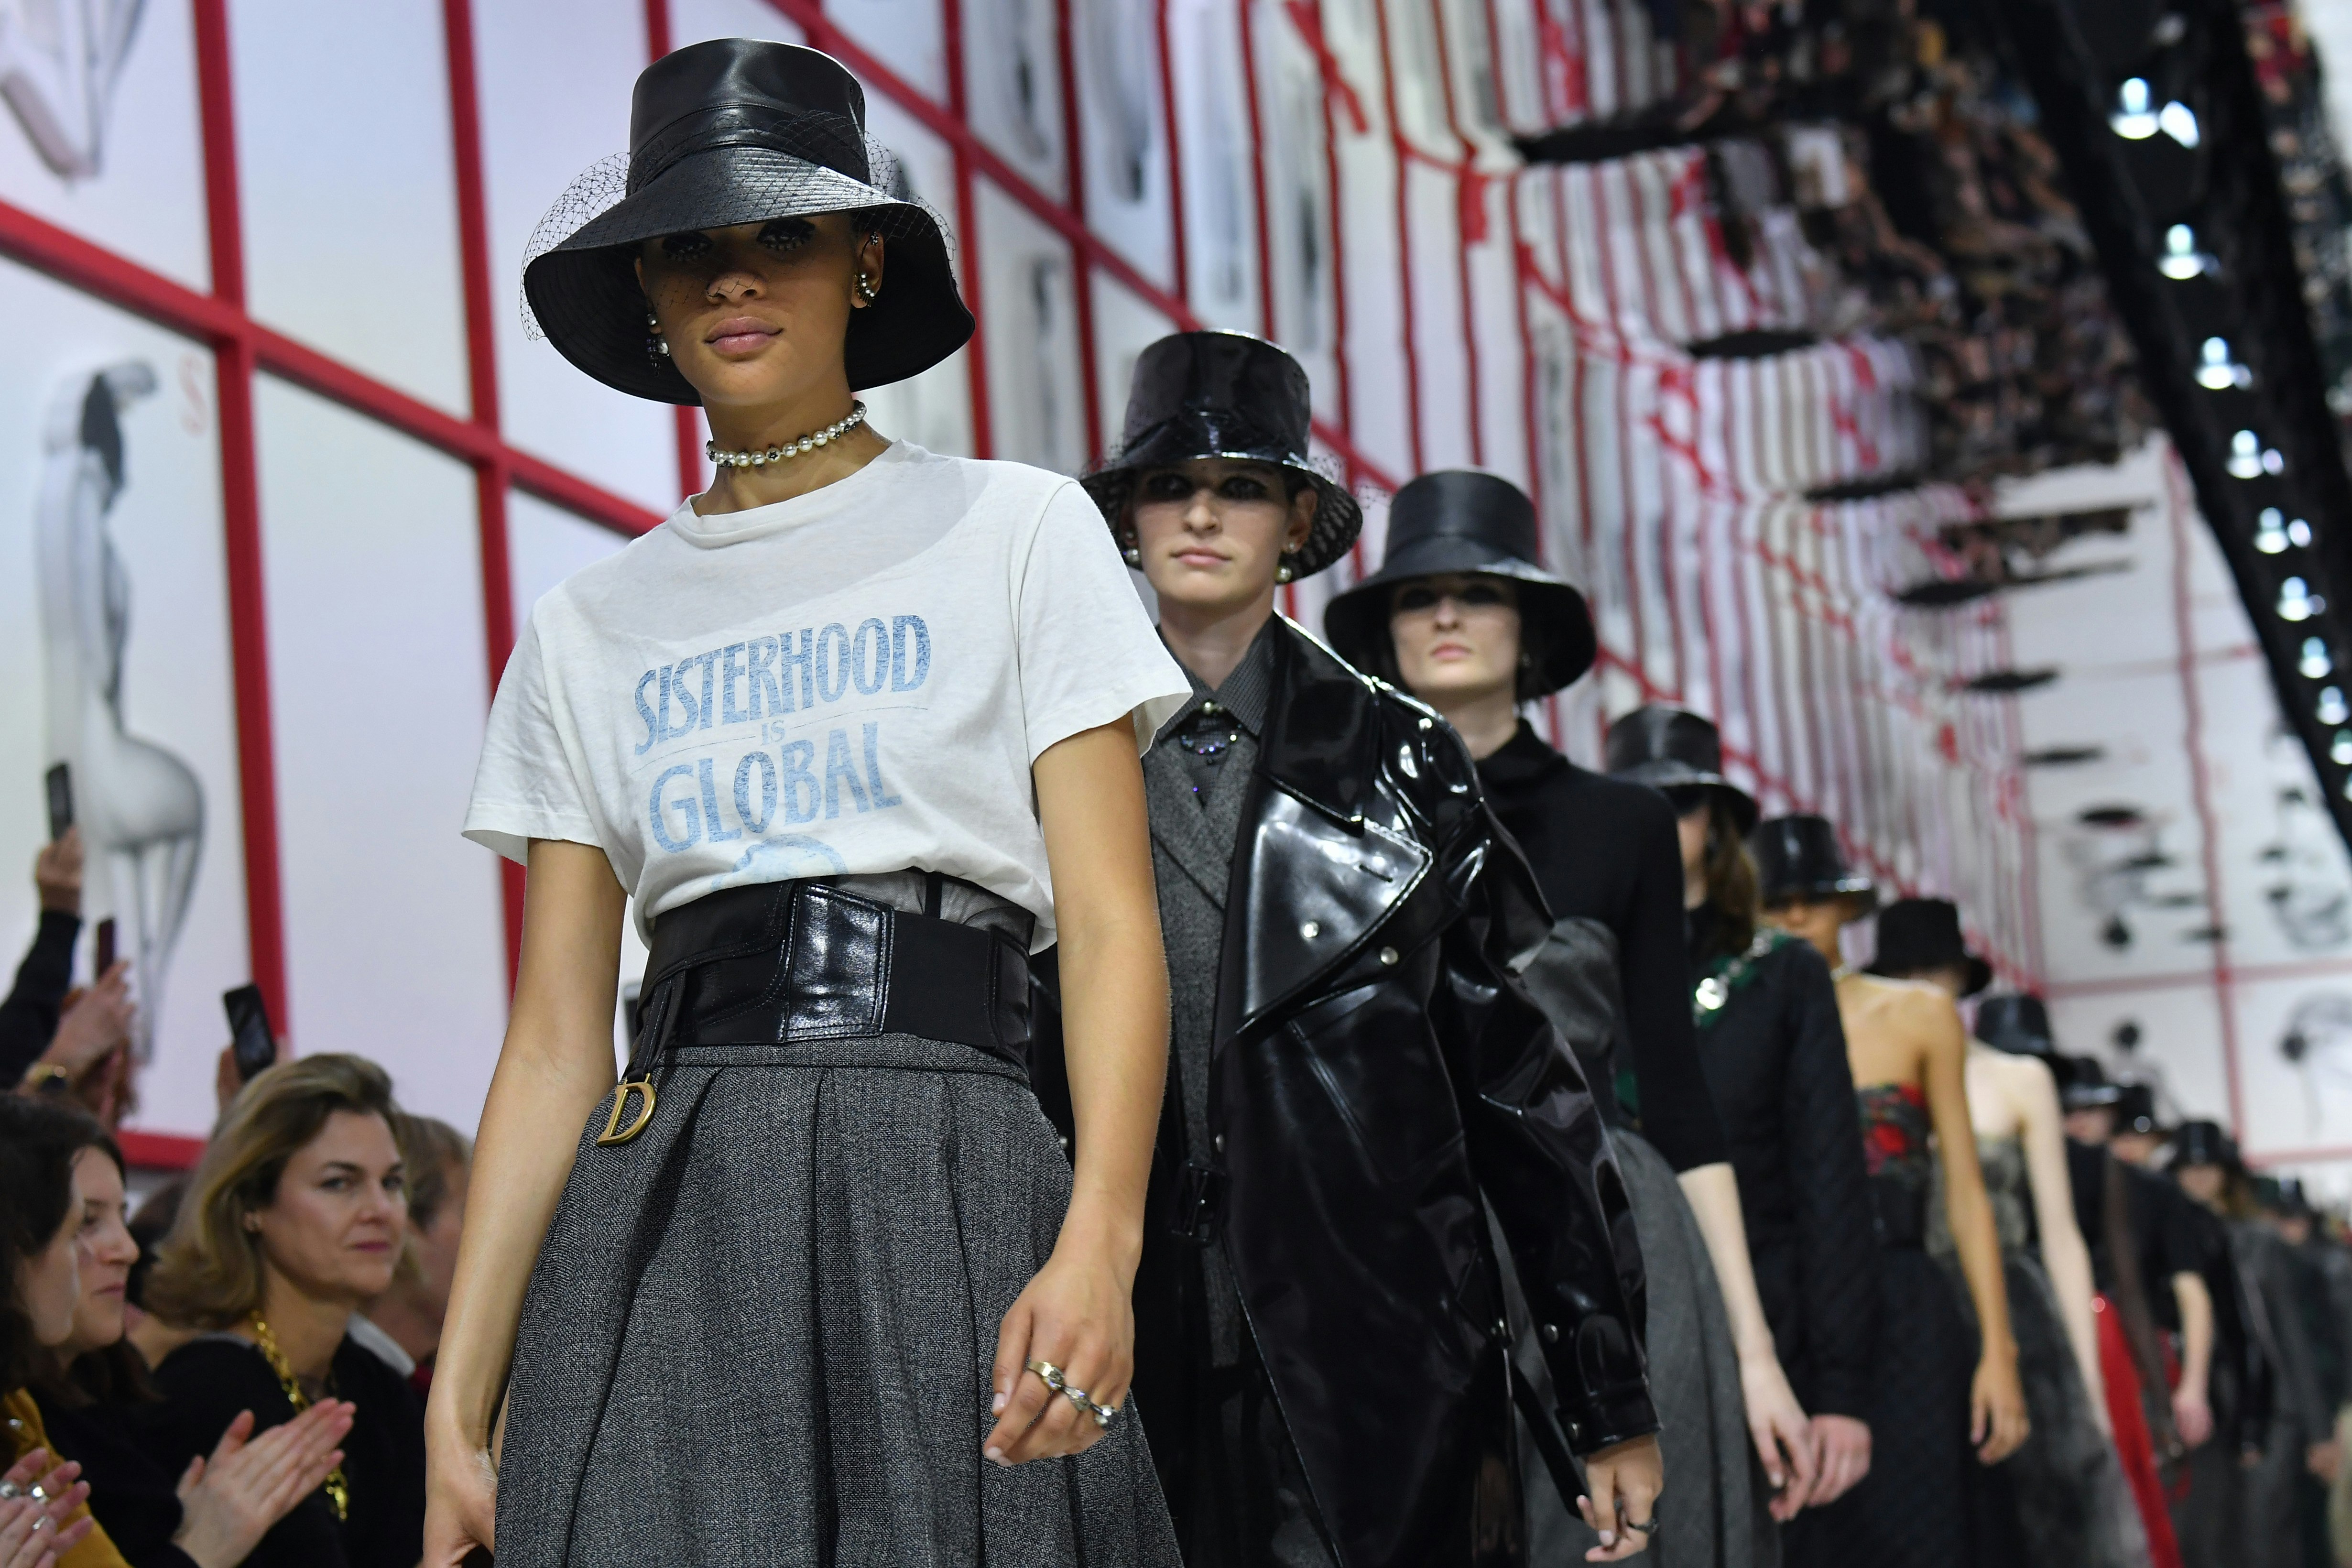 Dior introduces the new feminist slogan T-shirt everyone will want